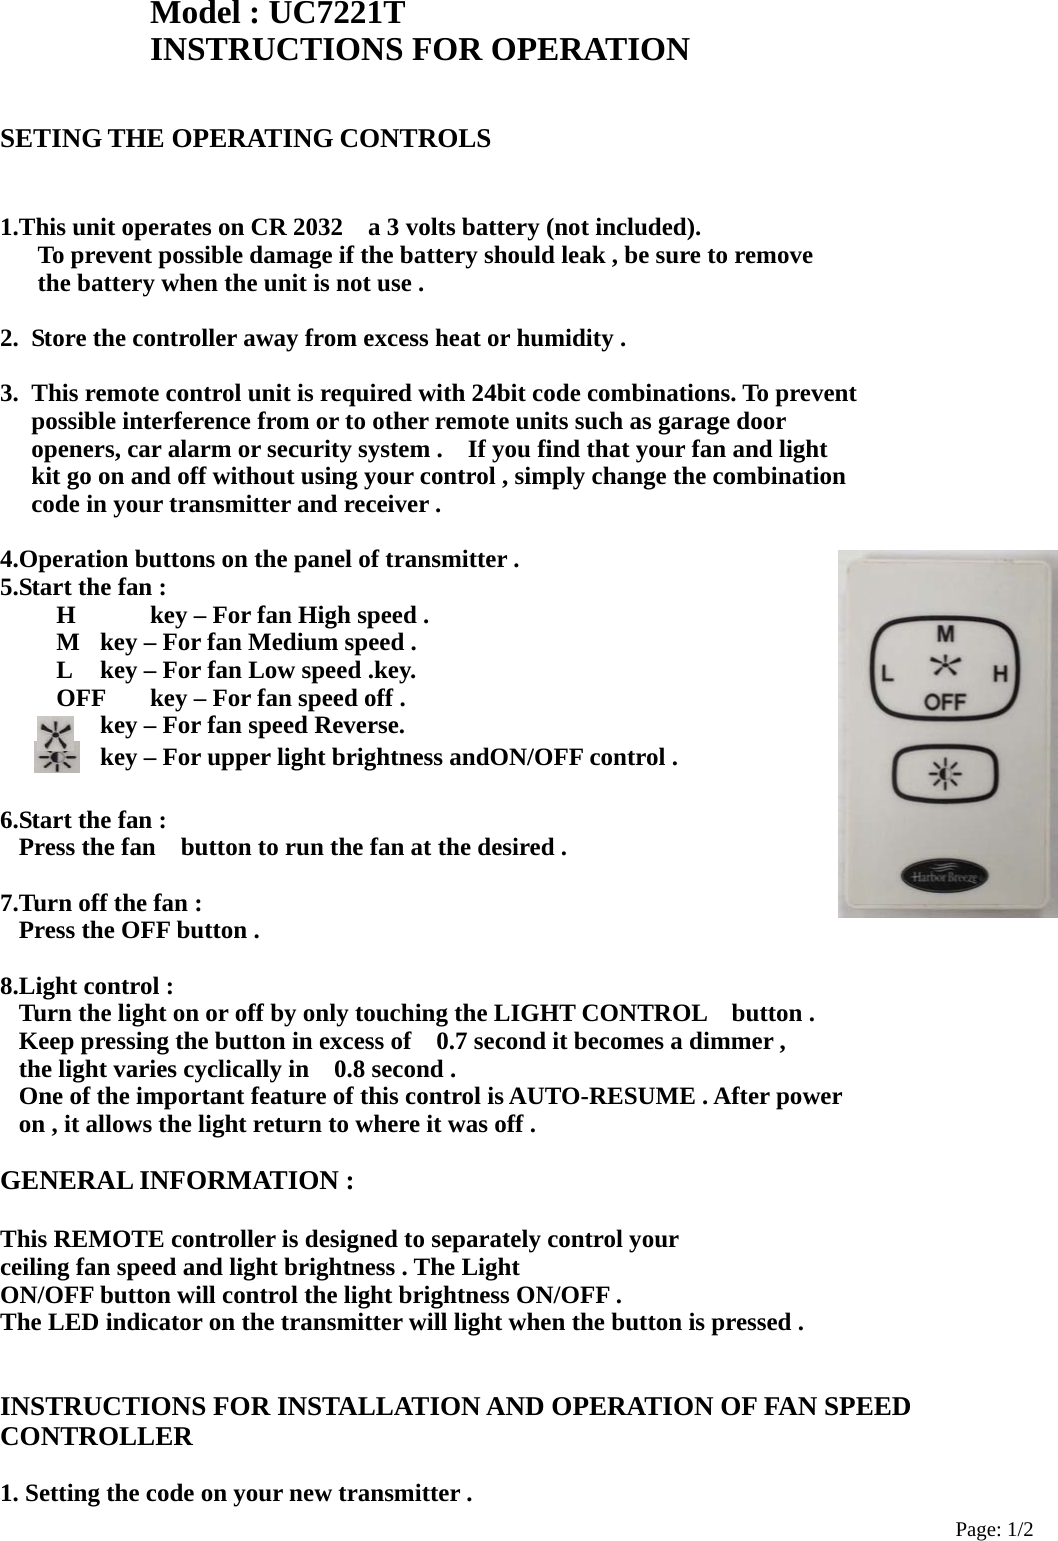 Page: 1/2 Model : UC7221T INSTRUCTIONS FOR OPERATION    SETING THE OPERATING CONTROLS   1.This unit operates on CR 2032    a 3 volts battery (not included).       To prevent possible damage if the battery should leak , be sure to remove       the battery when the unit is not use .  2.  Store the controller away from excess heat or humidity .  3.  This remote control unit is required with 24bit code combinations. To prevent   possible interference from or to other remote units such as garage door   openers, car alarm or security system .    If you find that your fan and light     kit go on and off without using your control , simply change the combination   code in your transmitter and receiver .  4.Operation buttons on the panel of transmitter . 5.Start the fan :       H      key – For fan High speed .       M   key – For fan Medium speed .       L     key – For fan Low speed .key.       OFF      key – For fan speed off .     key – For fan speed Reverse.       key – For upper light brightness andON/OFF control .  6.Start the fan : Press the fan    button to run the fan at the desired .  7.Turn off the fan : Press the OFF button .  8.Light control : Turn the light on or off by only touching the LIGHT CONTROL    button . Keep pressing the button in excess of    0.7 second it becomes a dimmer , the light varies cyclically in    0.8 second . One of the important feature of this control is AUTO-RESUME . After power   on , it allows the light return to where it was off .  GENERAL INFORMATION :  This REMOTE controller is designed to separately control your   ceiling fan speed and light brightness . The Light     ON/OFF button will control the light brightness ON/OFF . The LED indicator on the transmitter will light when the button is pressed .   INSTRUCTIONS FOR INSTALLATION AND OPERATION OF FAN SPEED CONTROLLER  1. Setting the code on your new transmitter . 